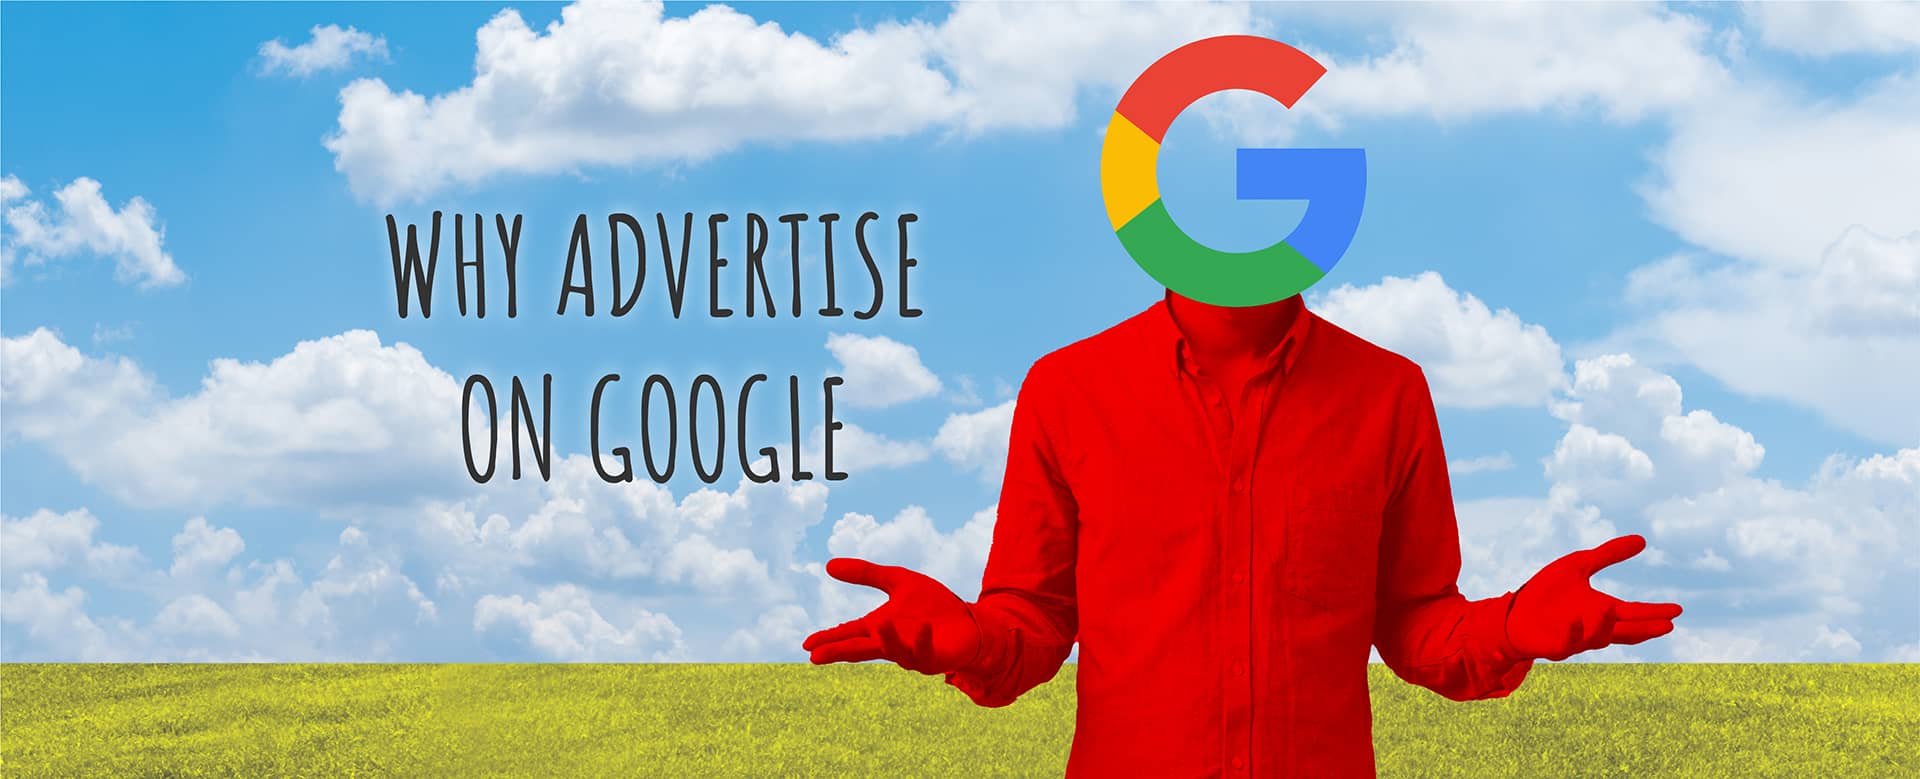 Why Advertise on Google